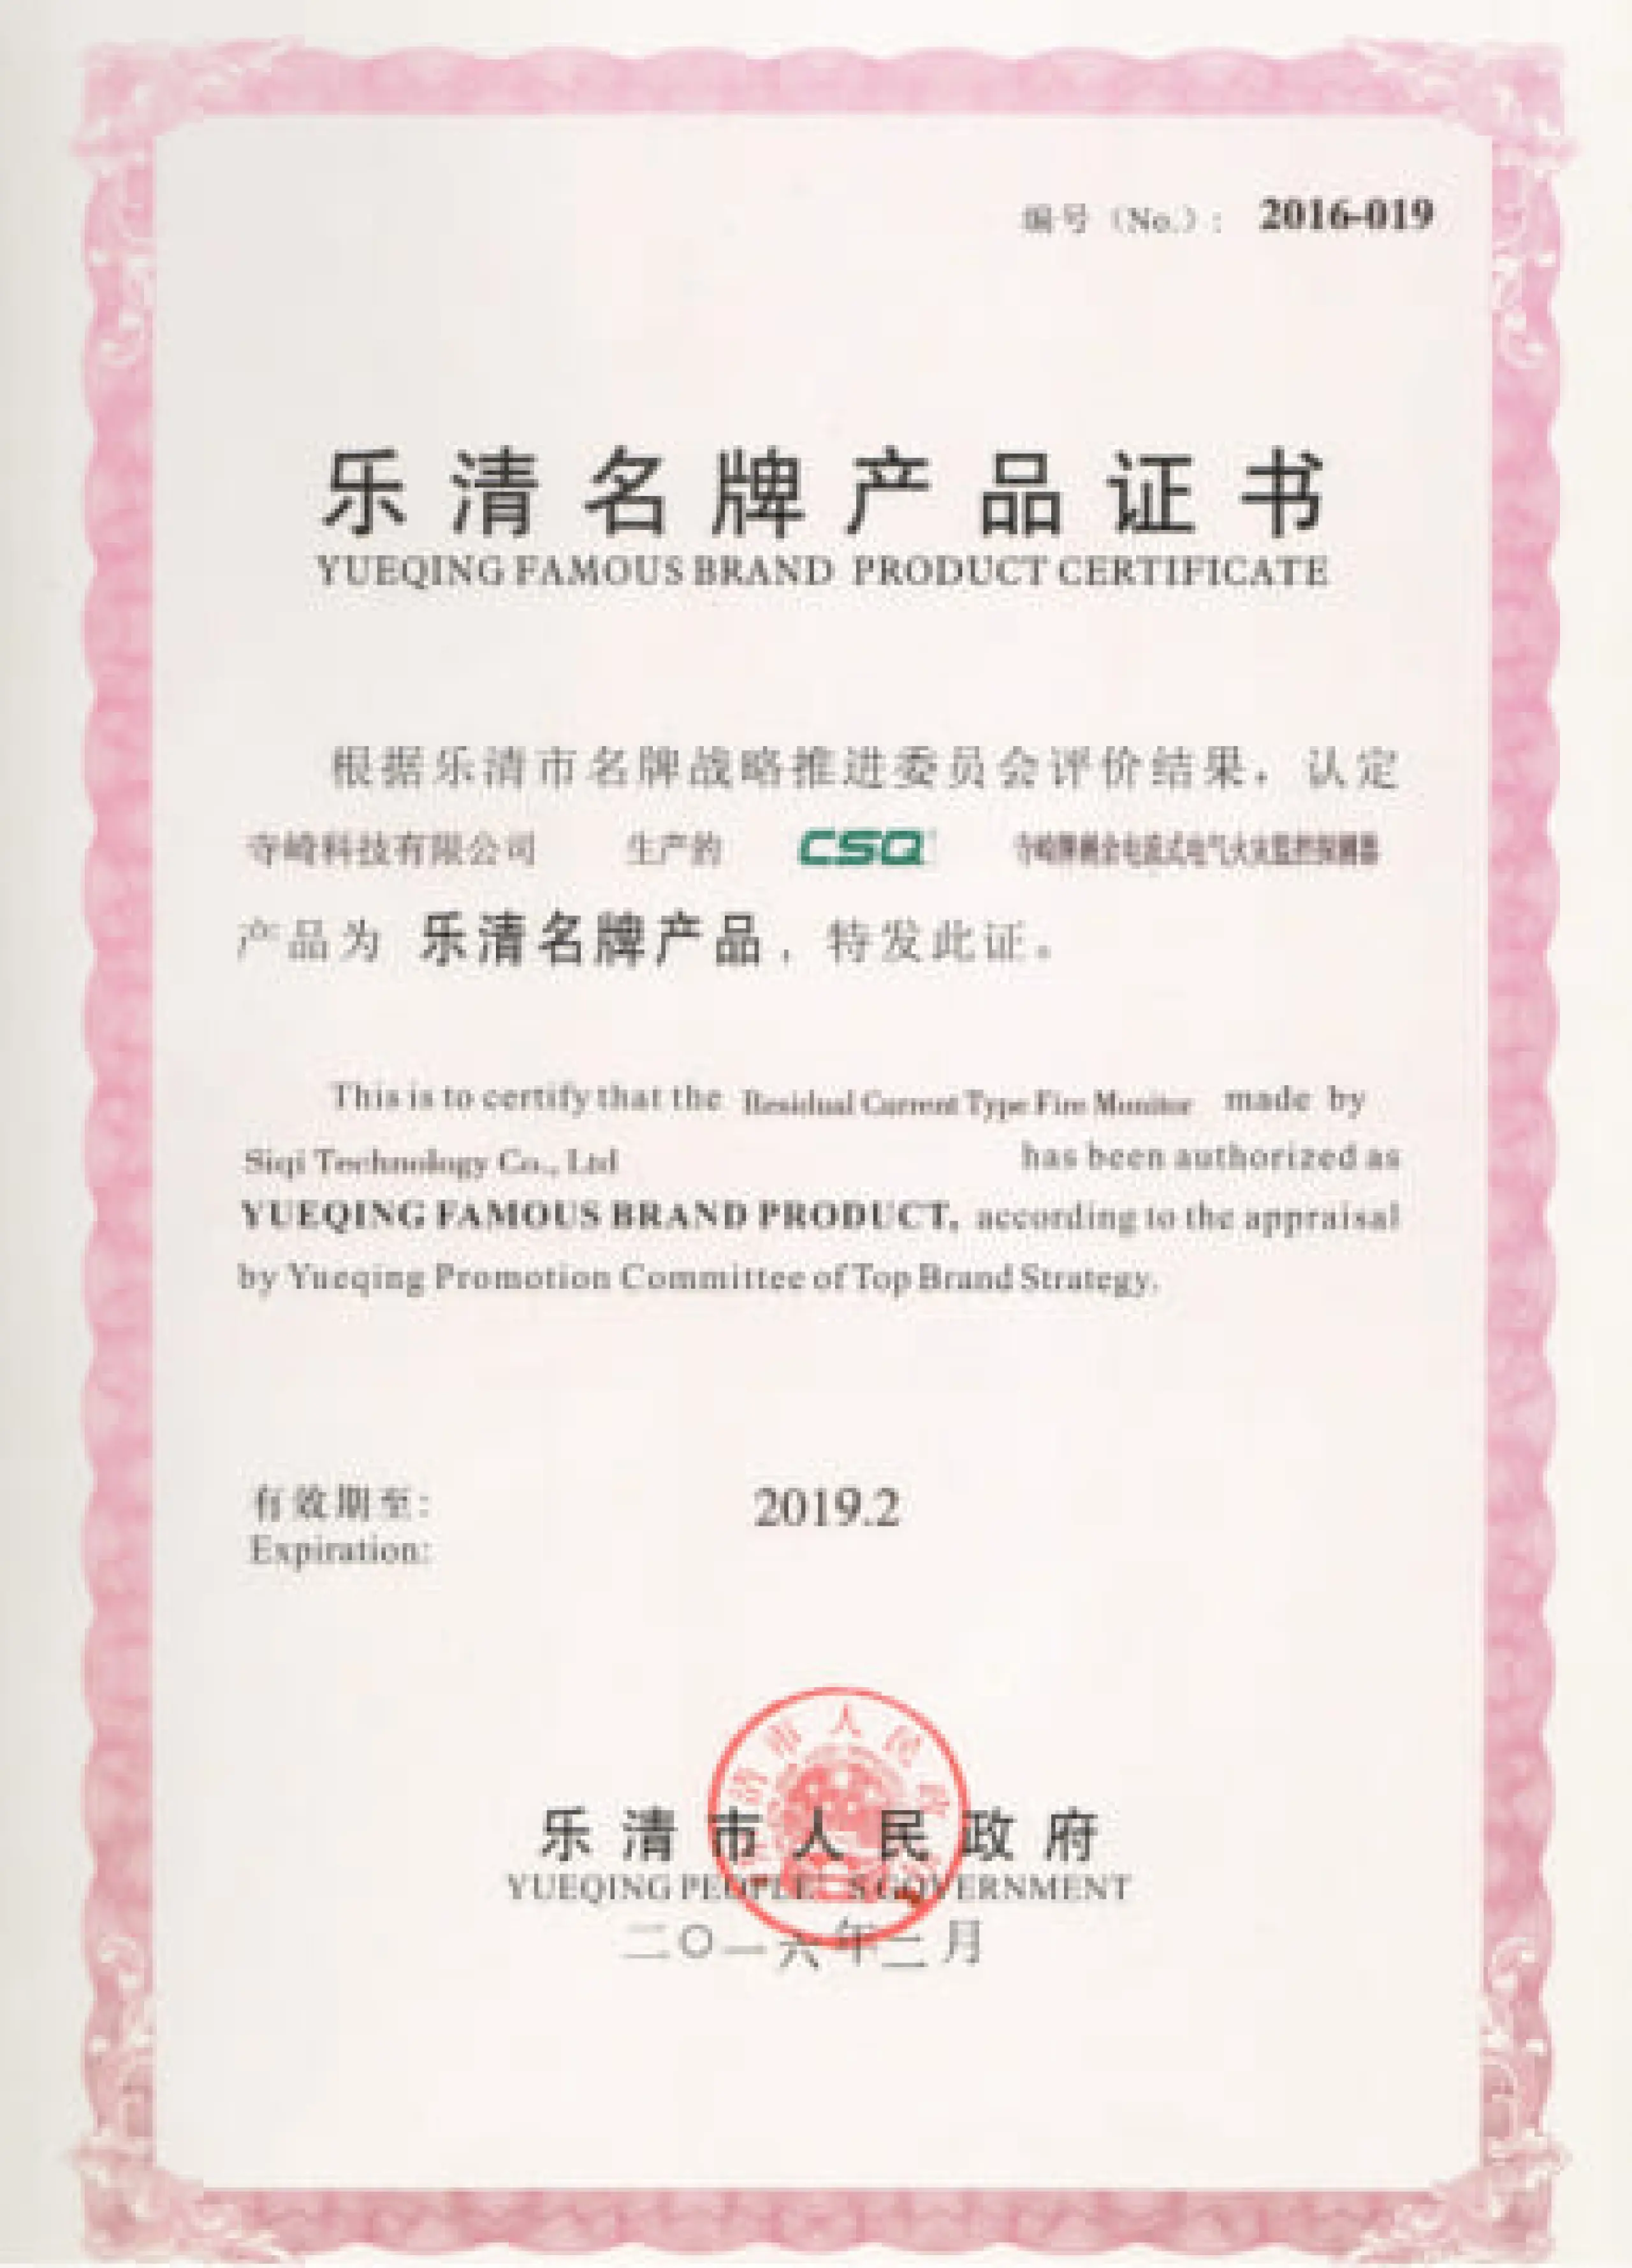 Yueqing Famous Brand Product Certificate